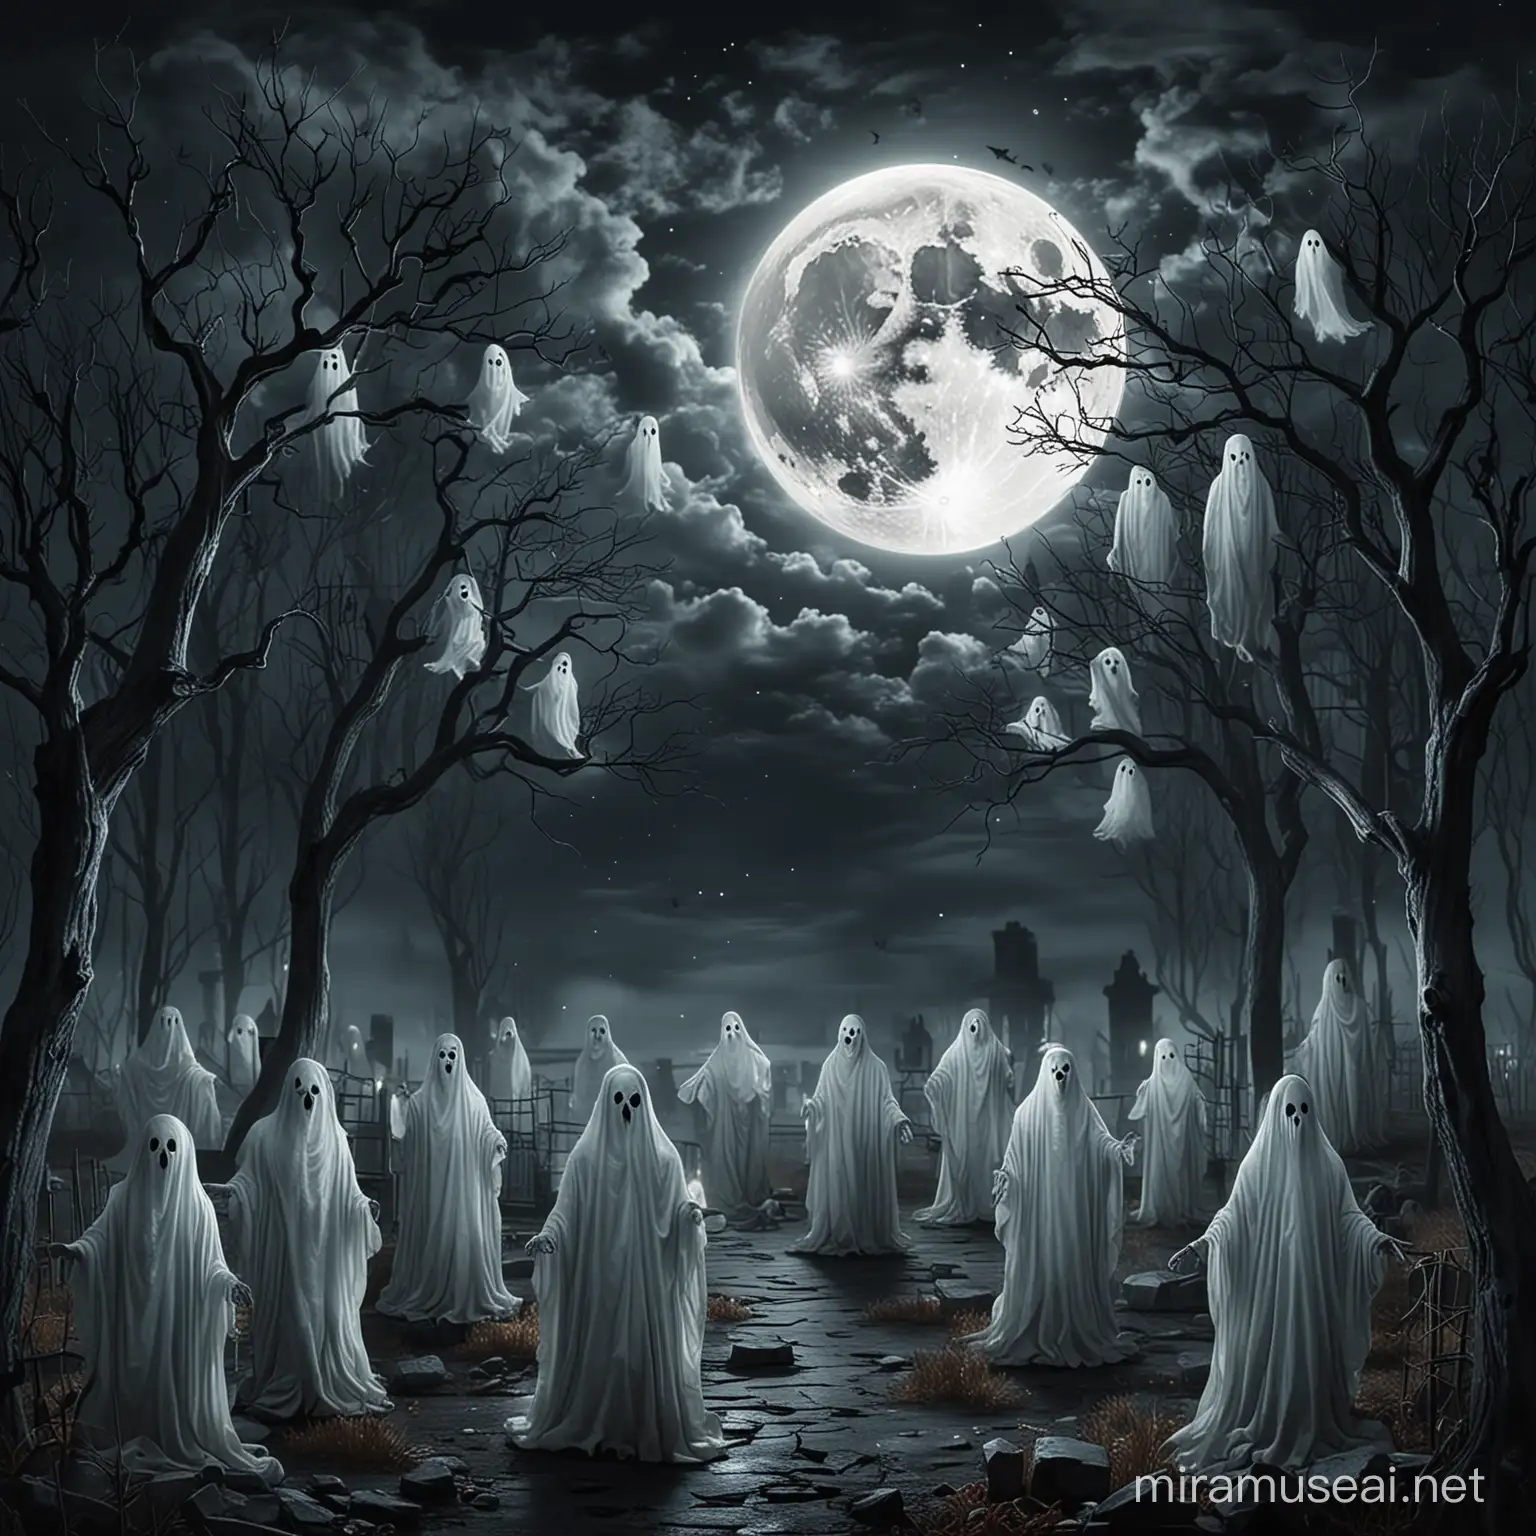 Eerie Ghostly Ambiance on a Moonlit Night